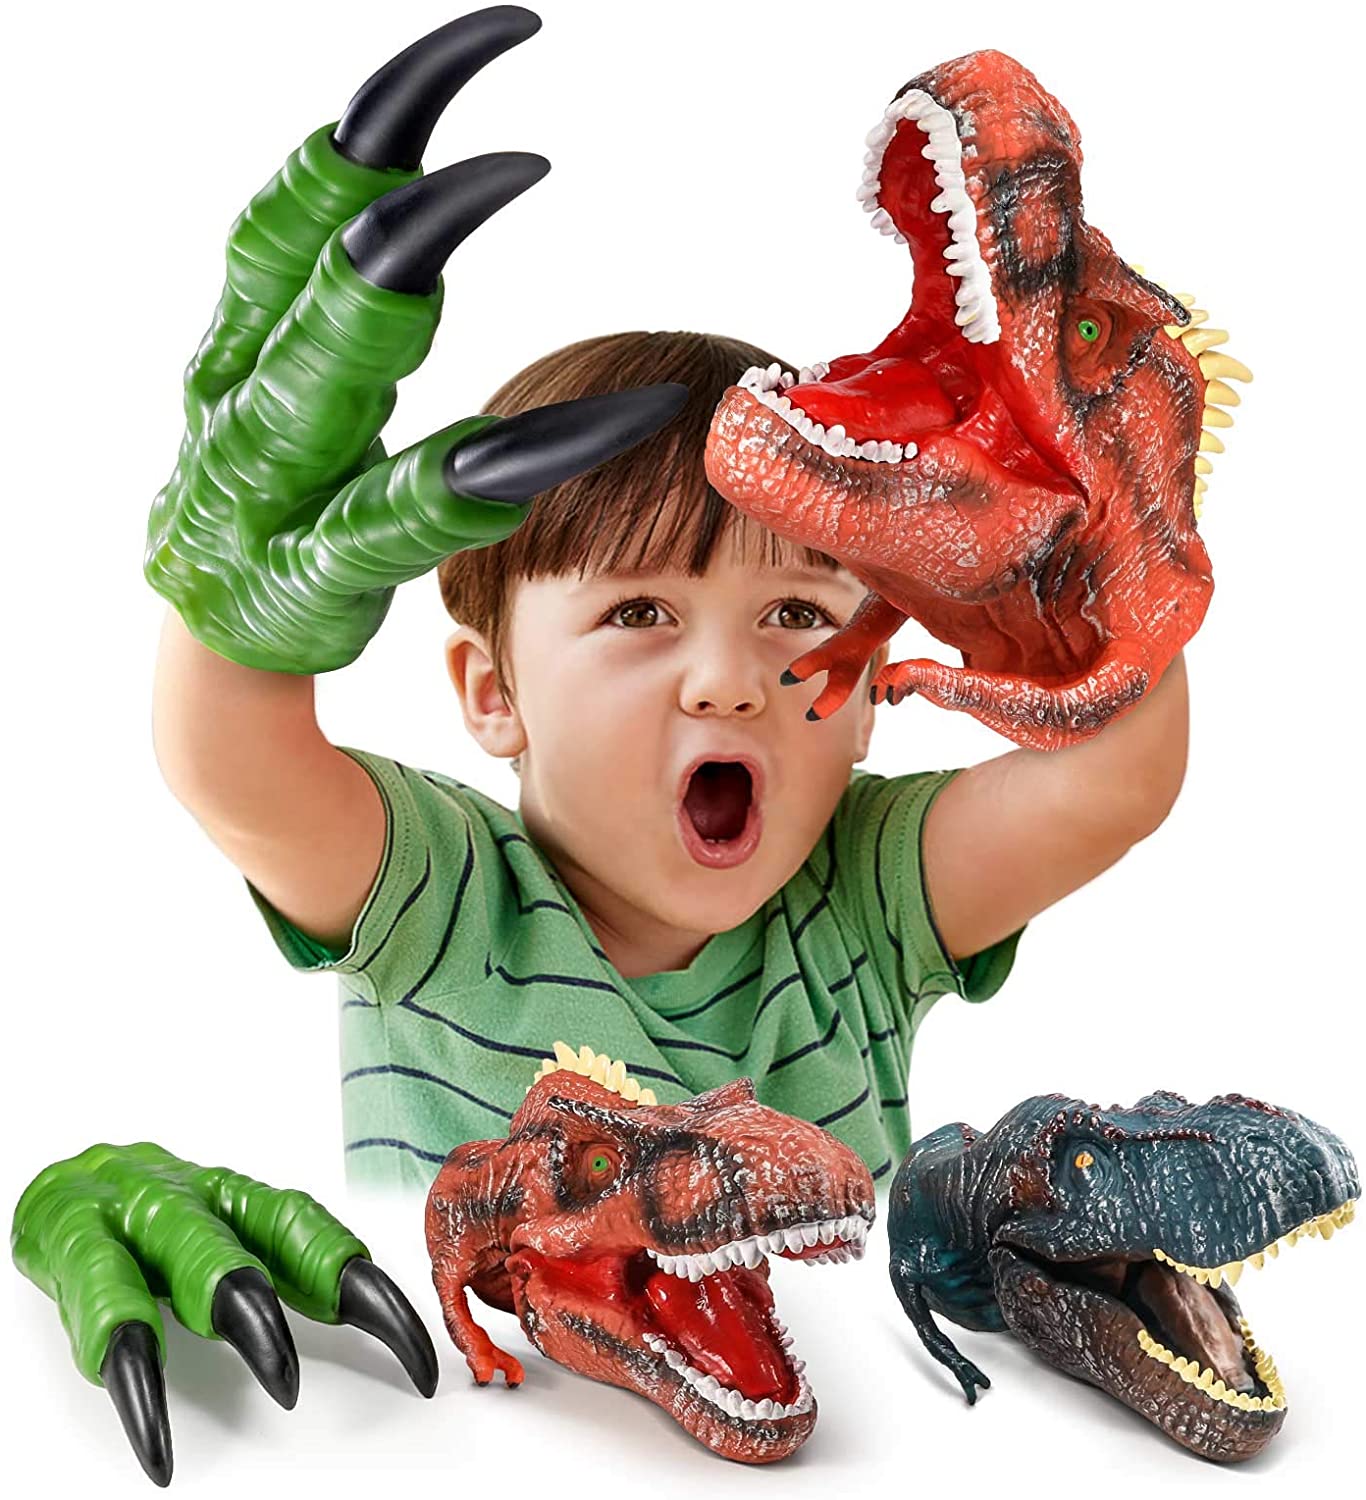 Kids Role Play Party Dinosaurs Game Dino Head Glove Triceratop Hand Puppet Toy 